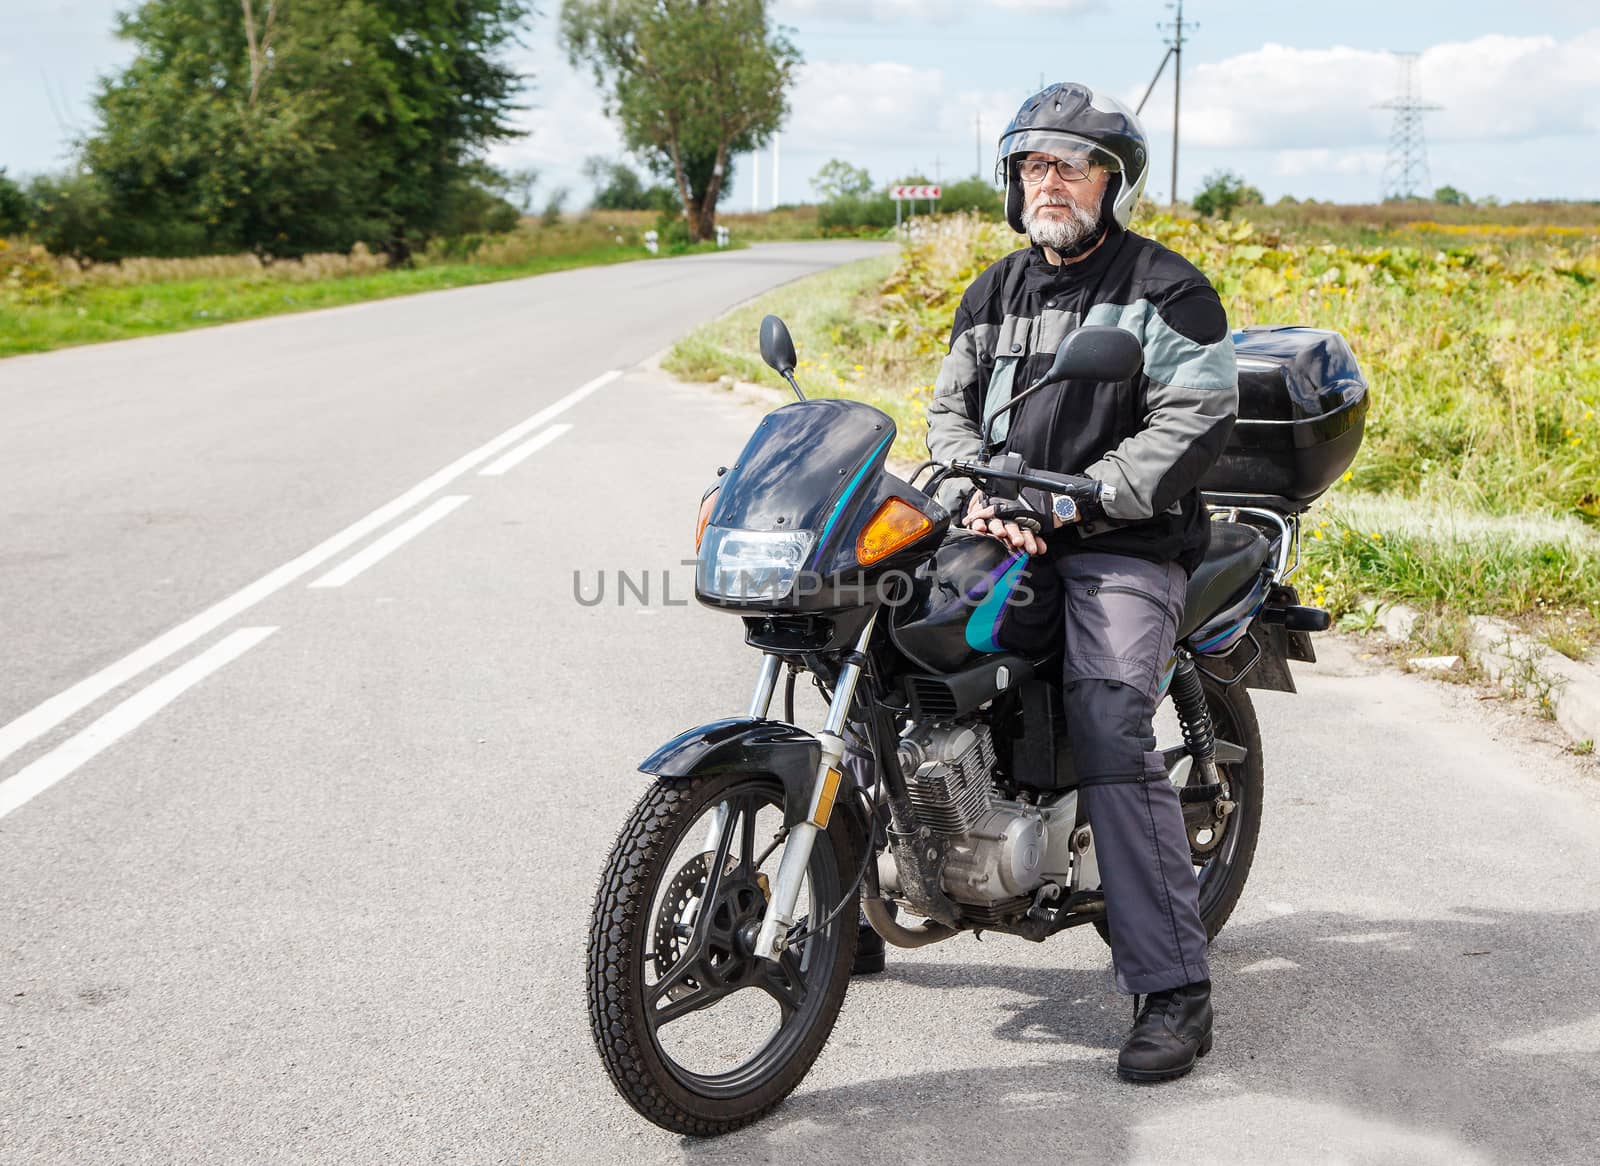 elderly motorcyclist wearing a jacket and glasses with a helmet sitting on his motorcycle on the open road on sunny summer day